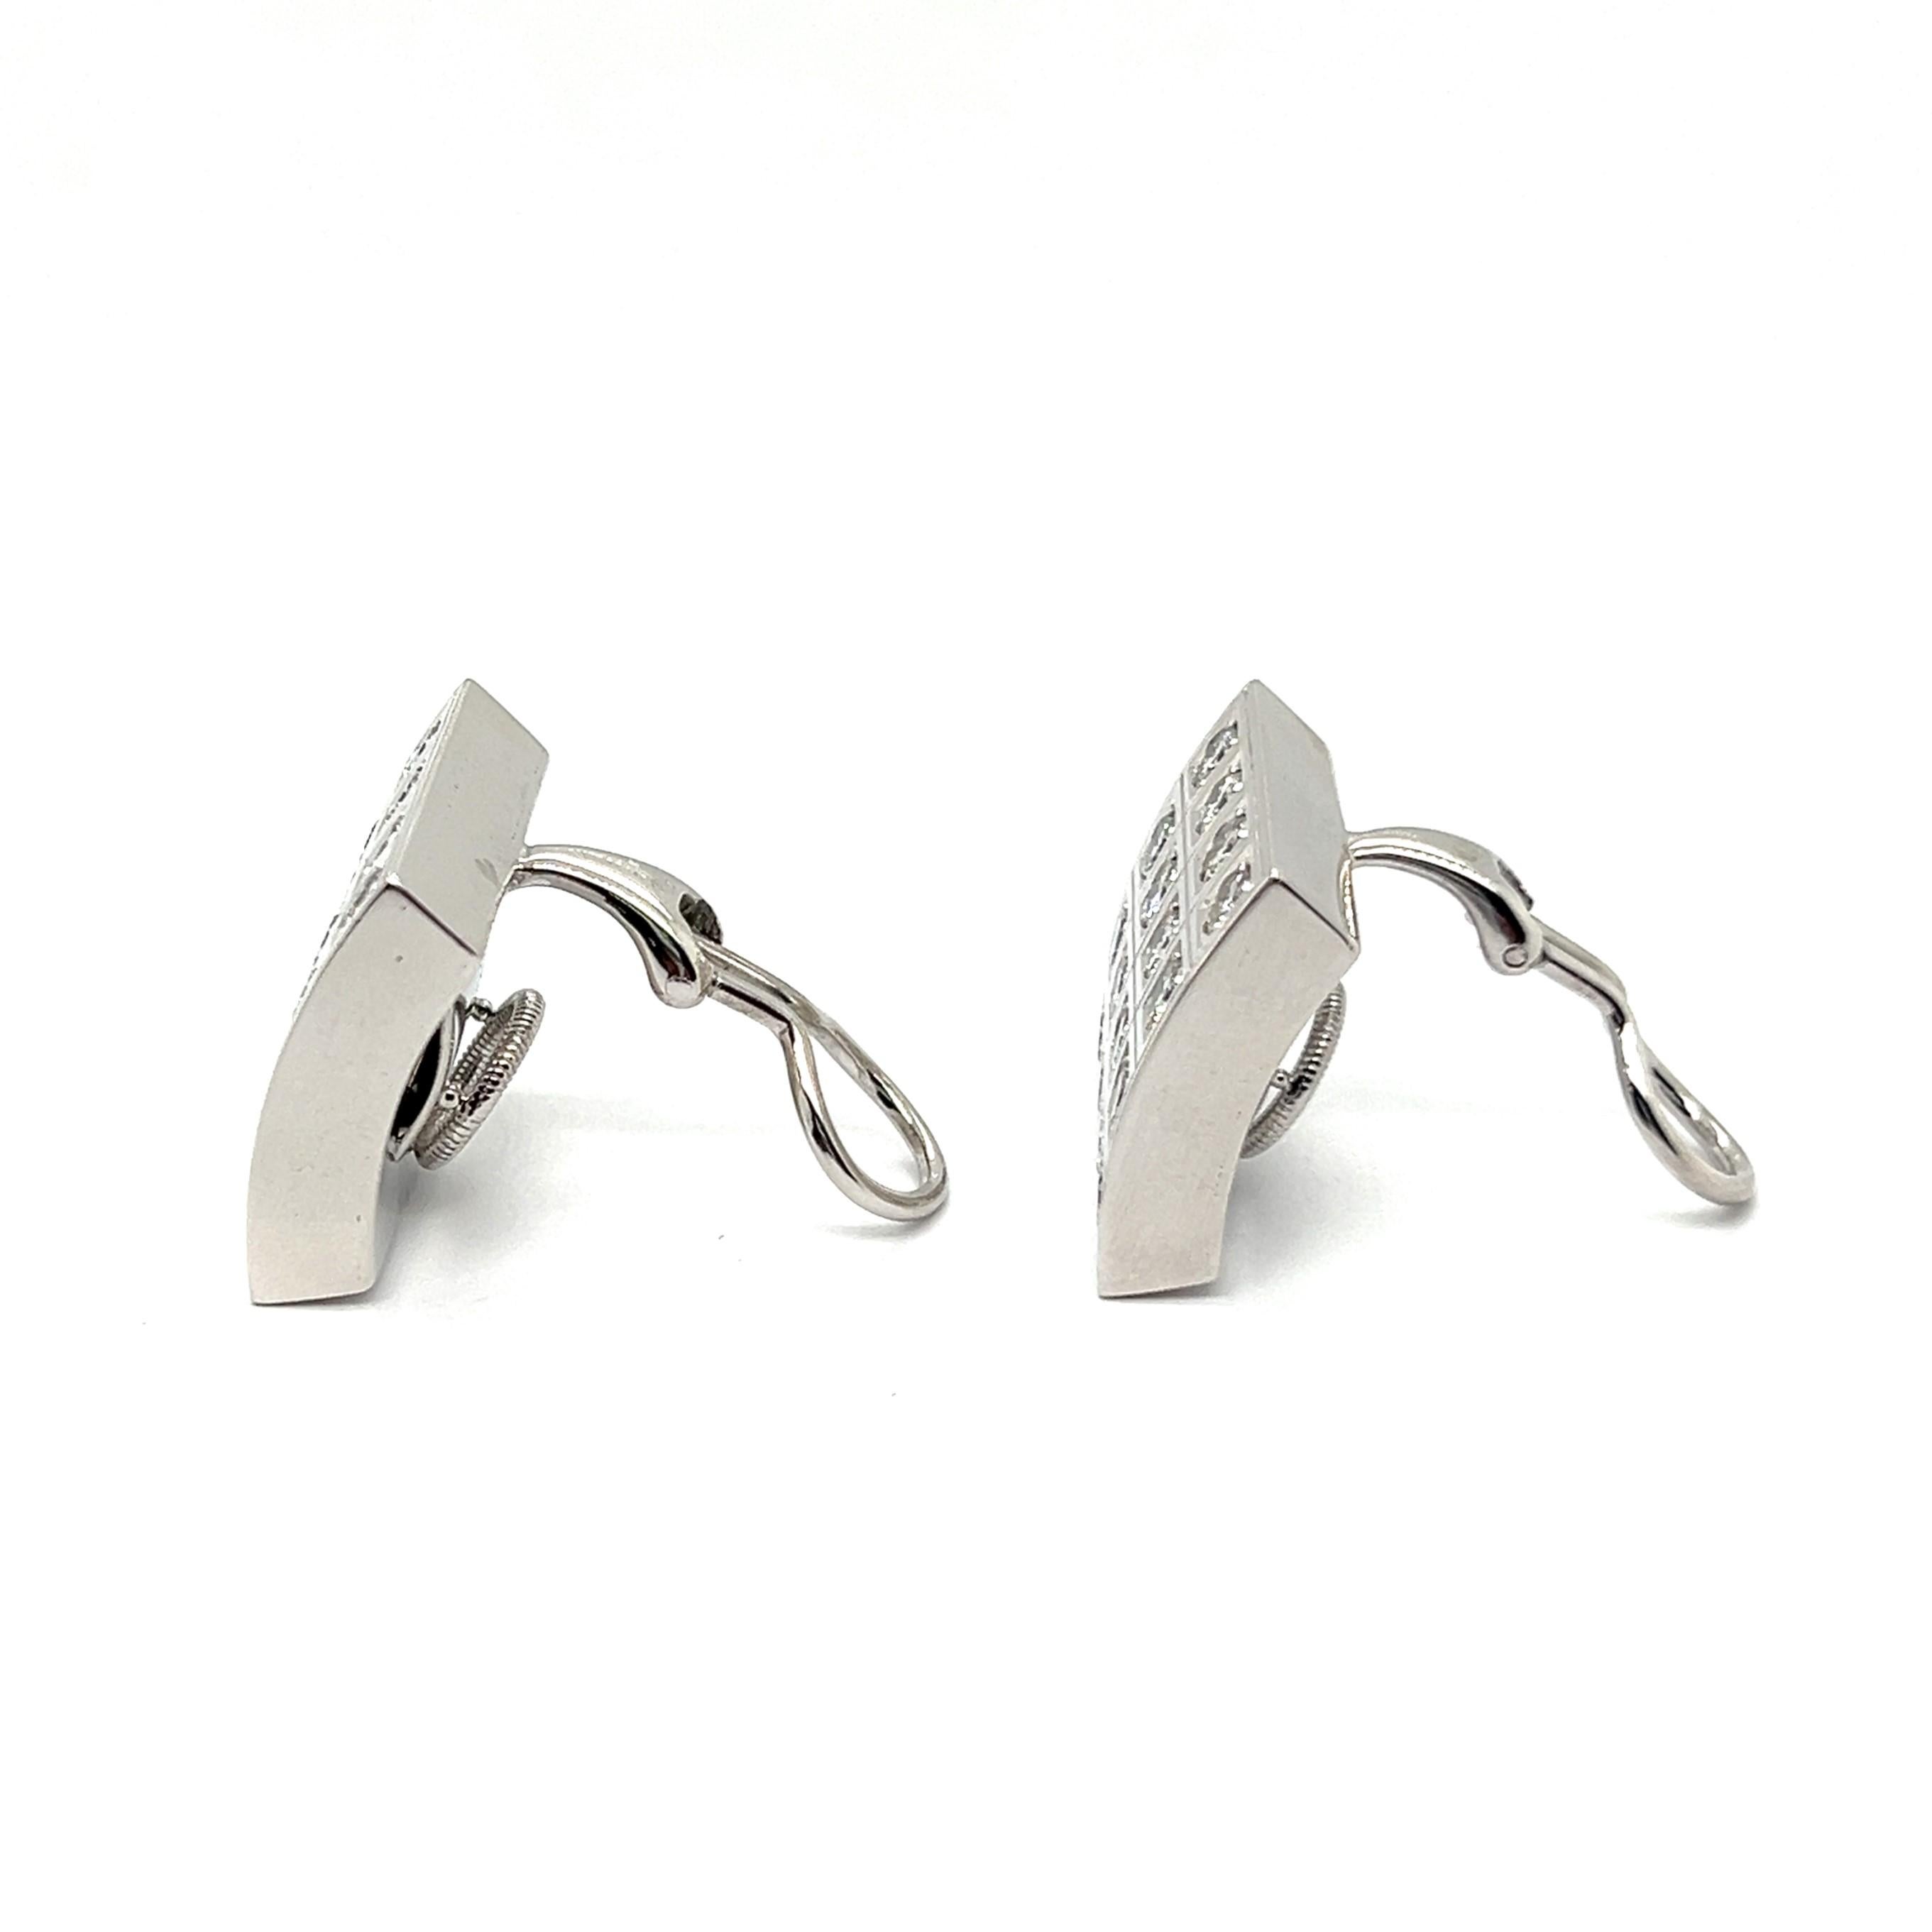  Bold Graphic Earrings with Diamonds in 18 Karat White Gold by Majo Fruithof 2